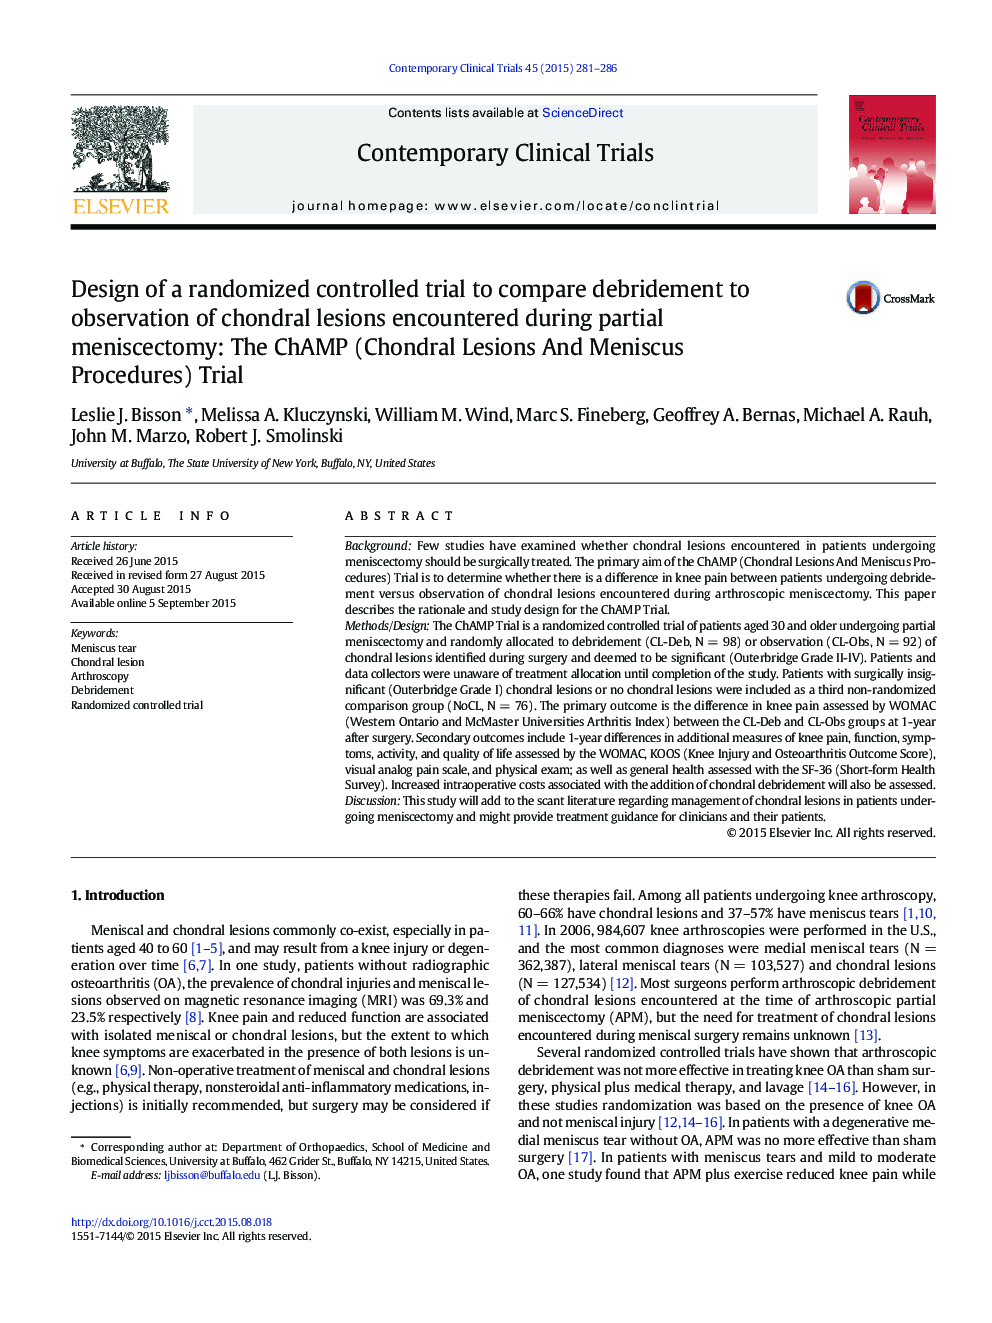 Design of a randomized controlled trial to compare debridement to observation of chondral lesions encountered during partial meniscectomy: The ChAMP (Chondral Lesions And Meniscus Procedures) Trial